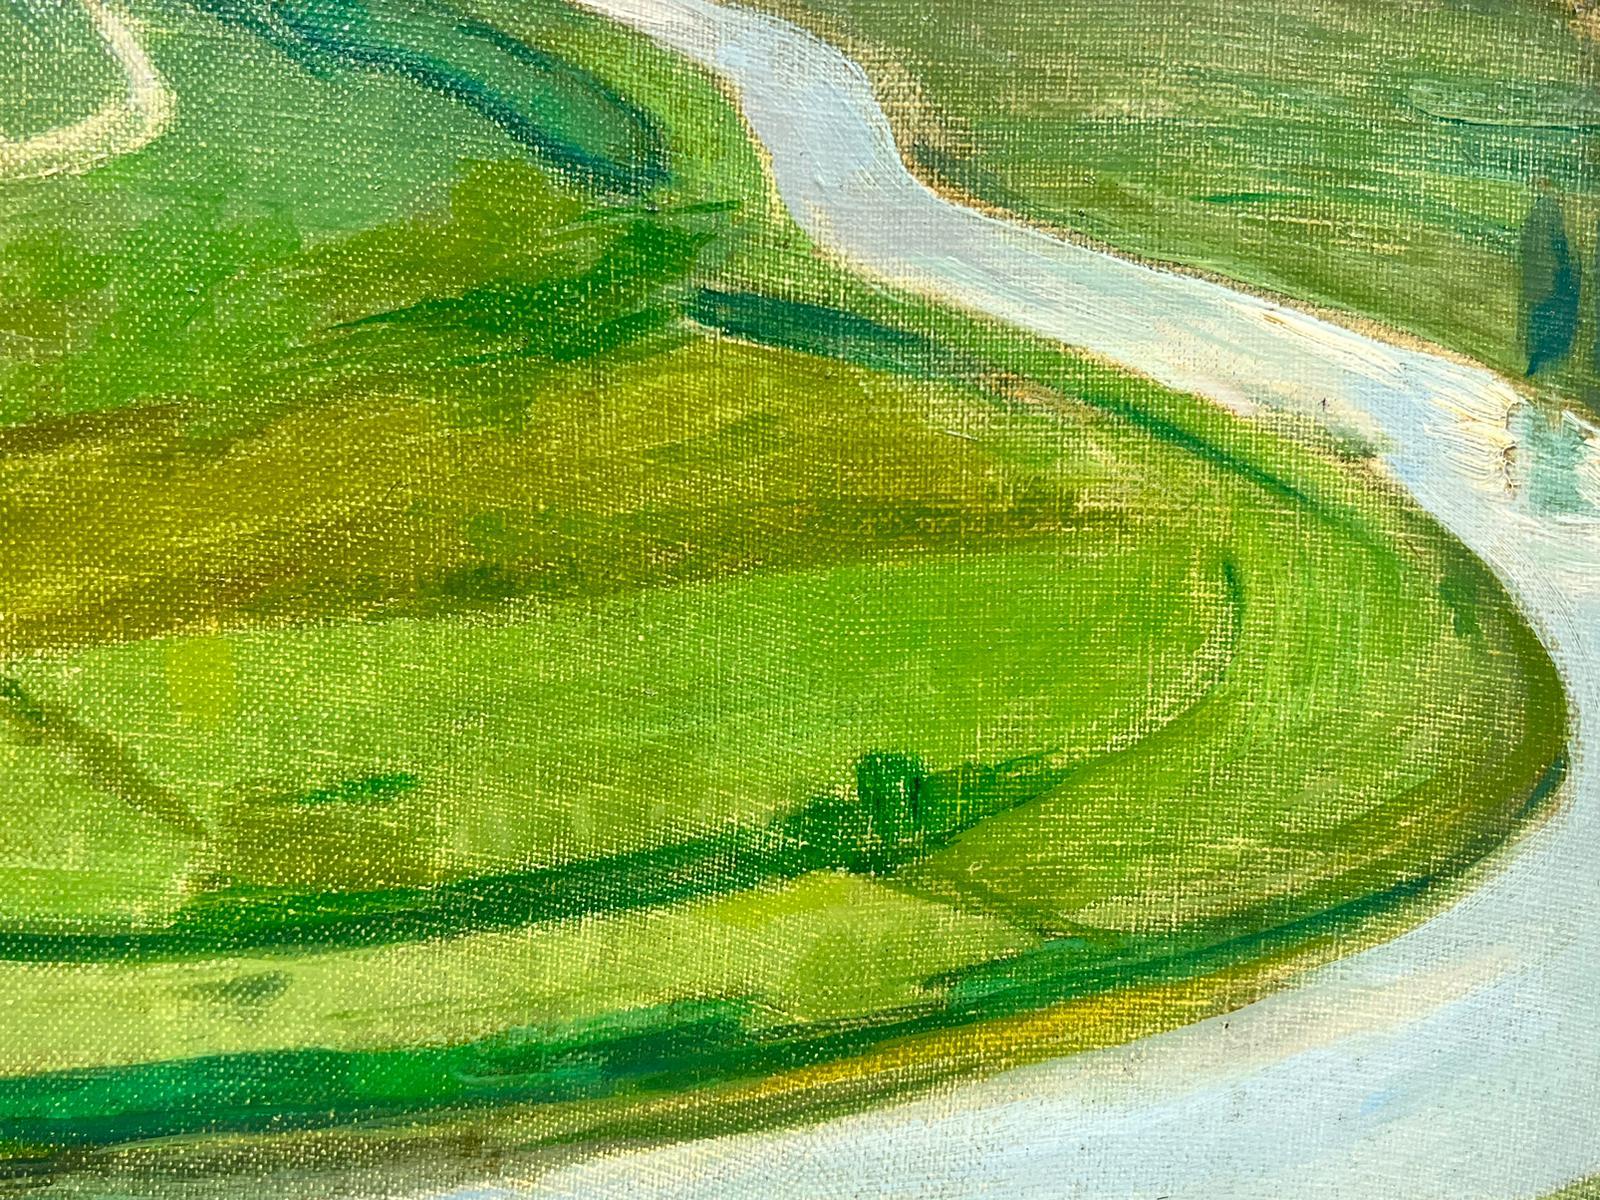 The Winding River
French School, mid 20th century
oil painting on canvas, unframed
painting: 9.5 x 13 inches
condition: overall very good